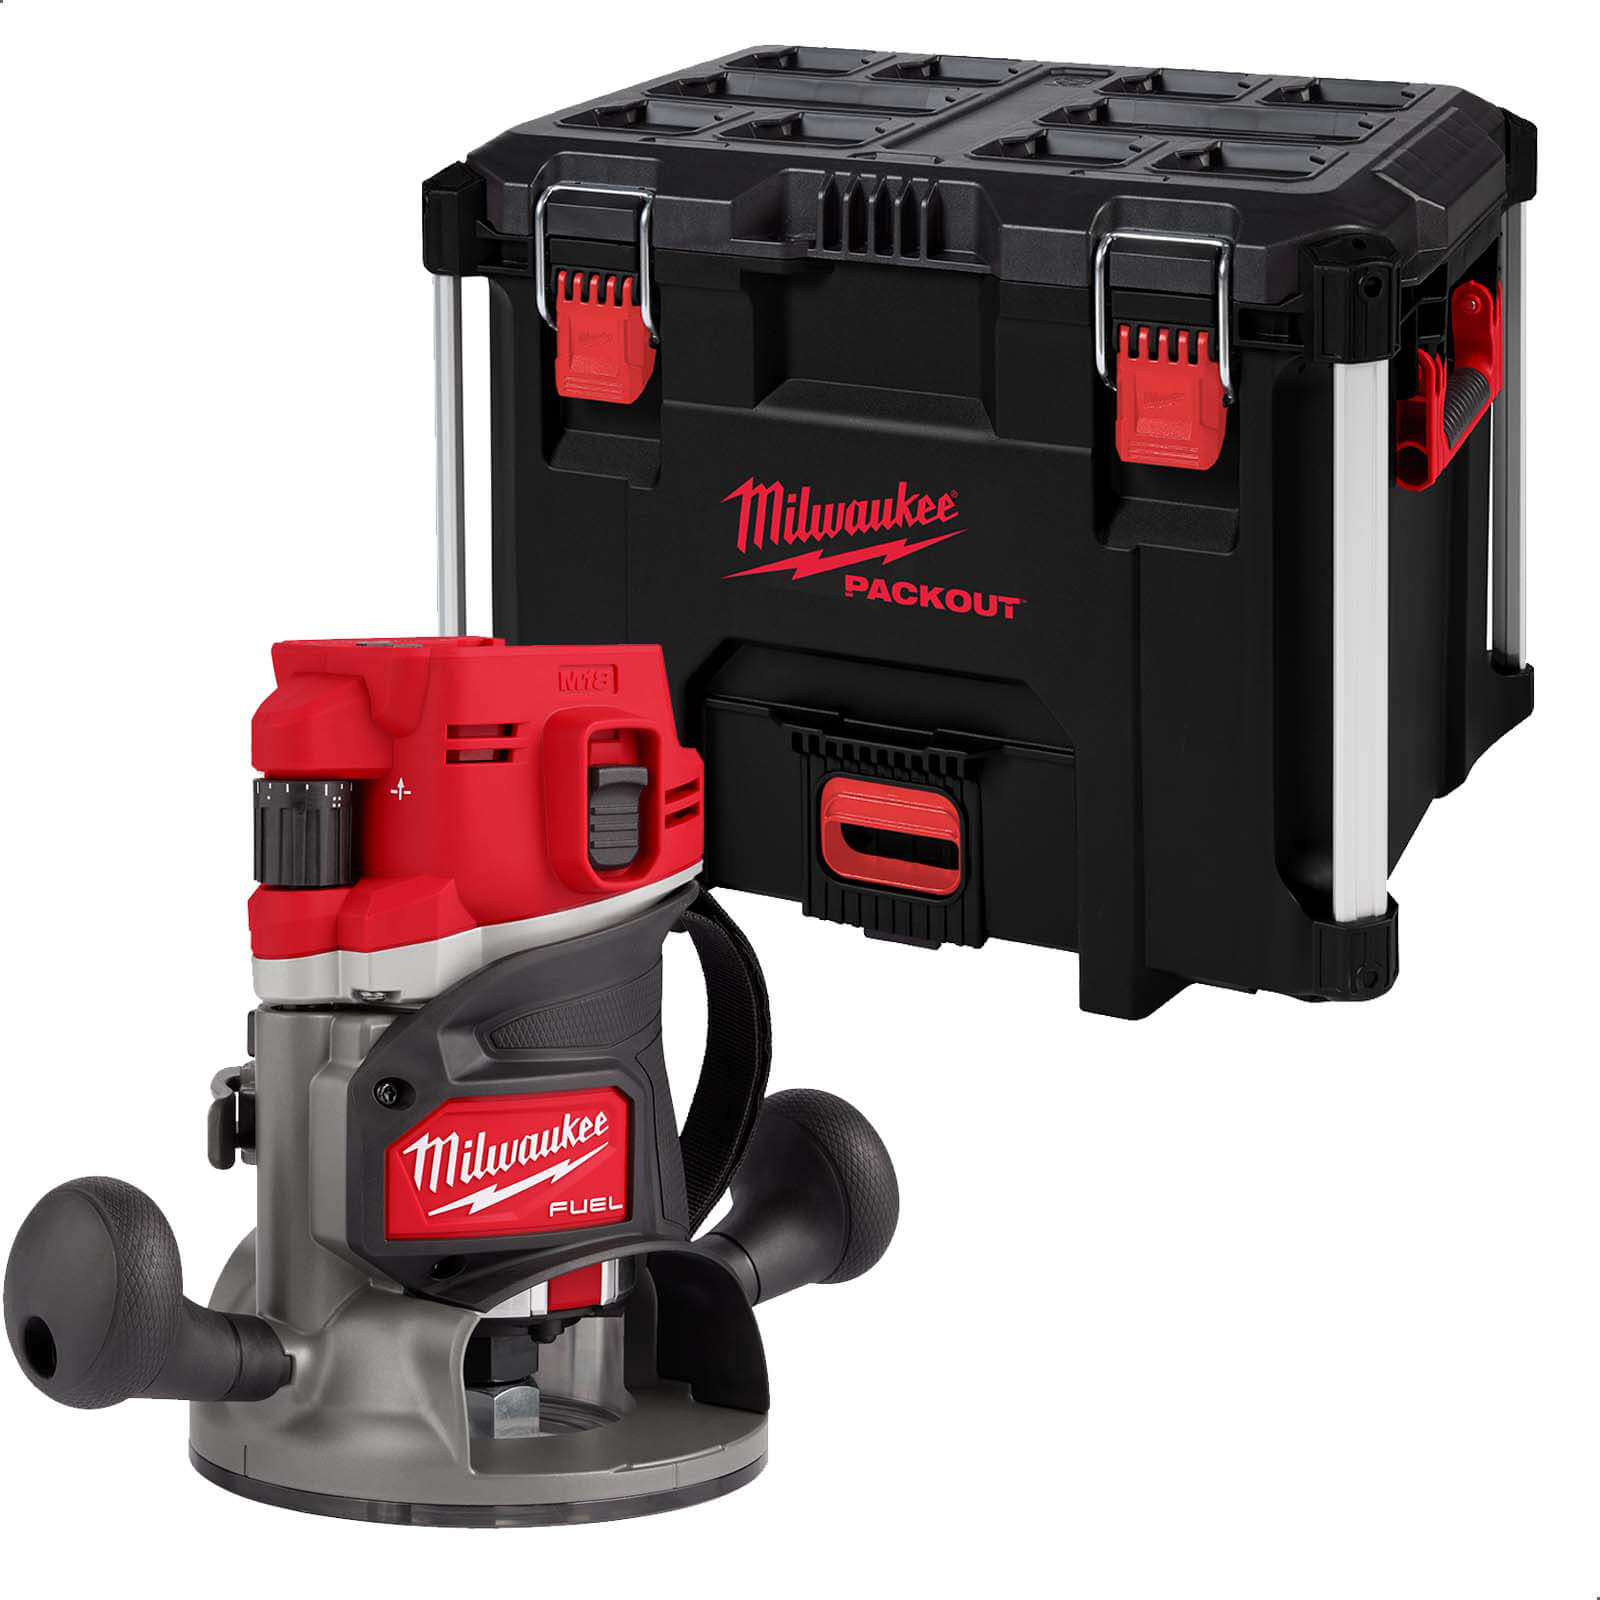 Milwaukee M18 FR12 Fuel 18v Cordless Brushless 1/2" Trim Router No Batteries No Charger Case & Accessories